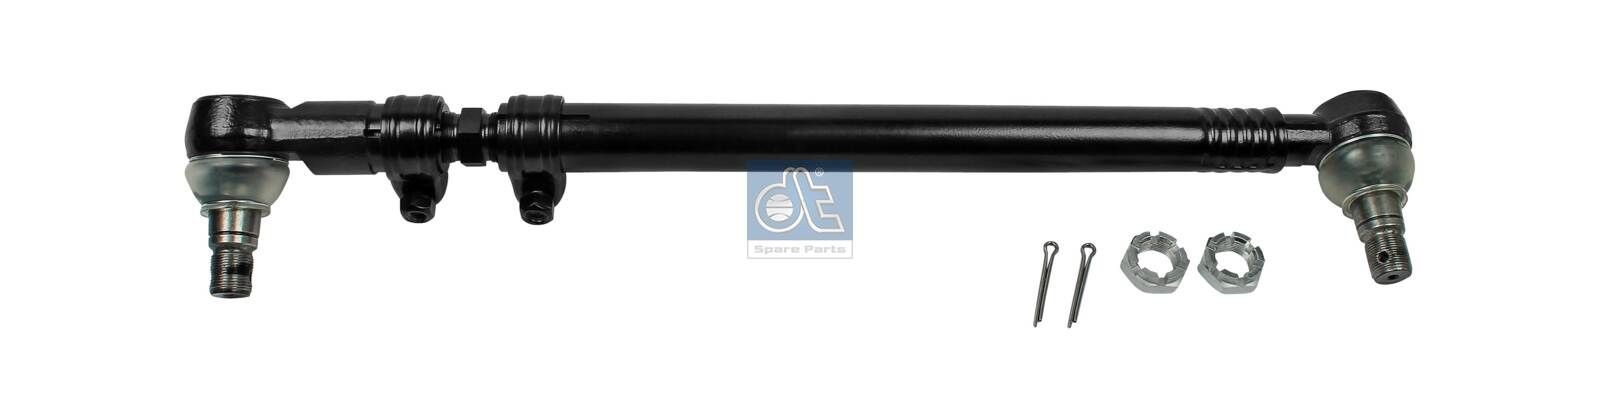 DT Spare Parts 4.65666 Rod Assembly A 627 330 02 03